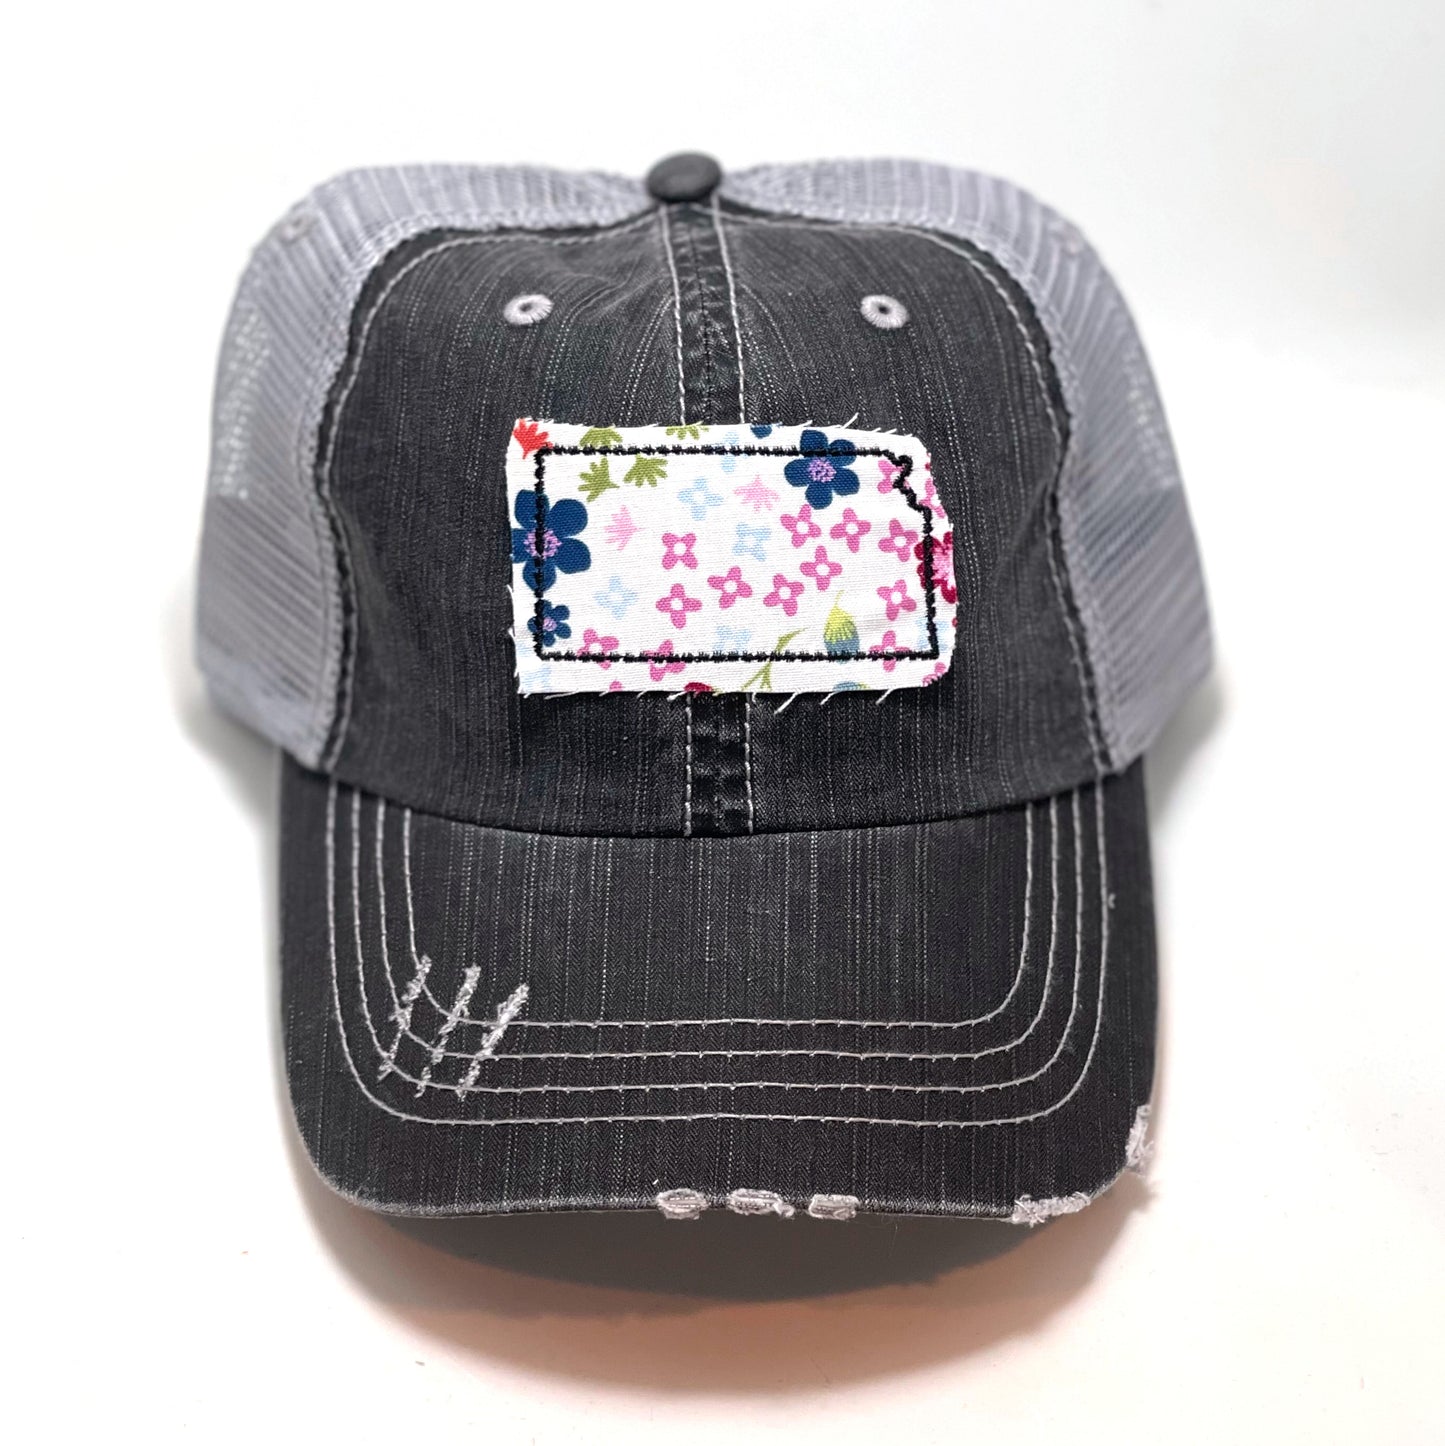 gray distressed trucker hat with gray floral fabric state of Kansas